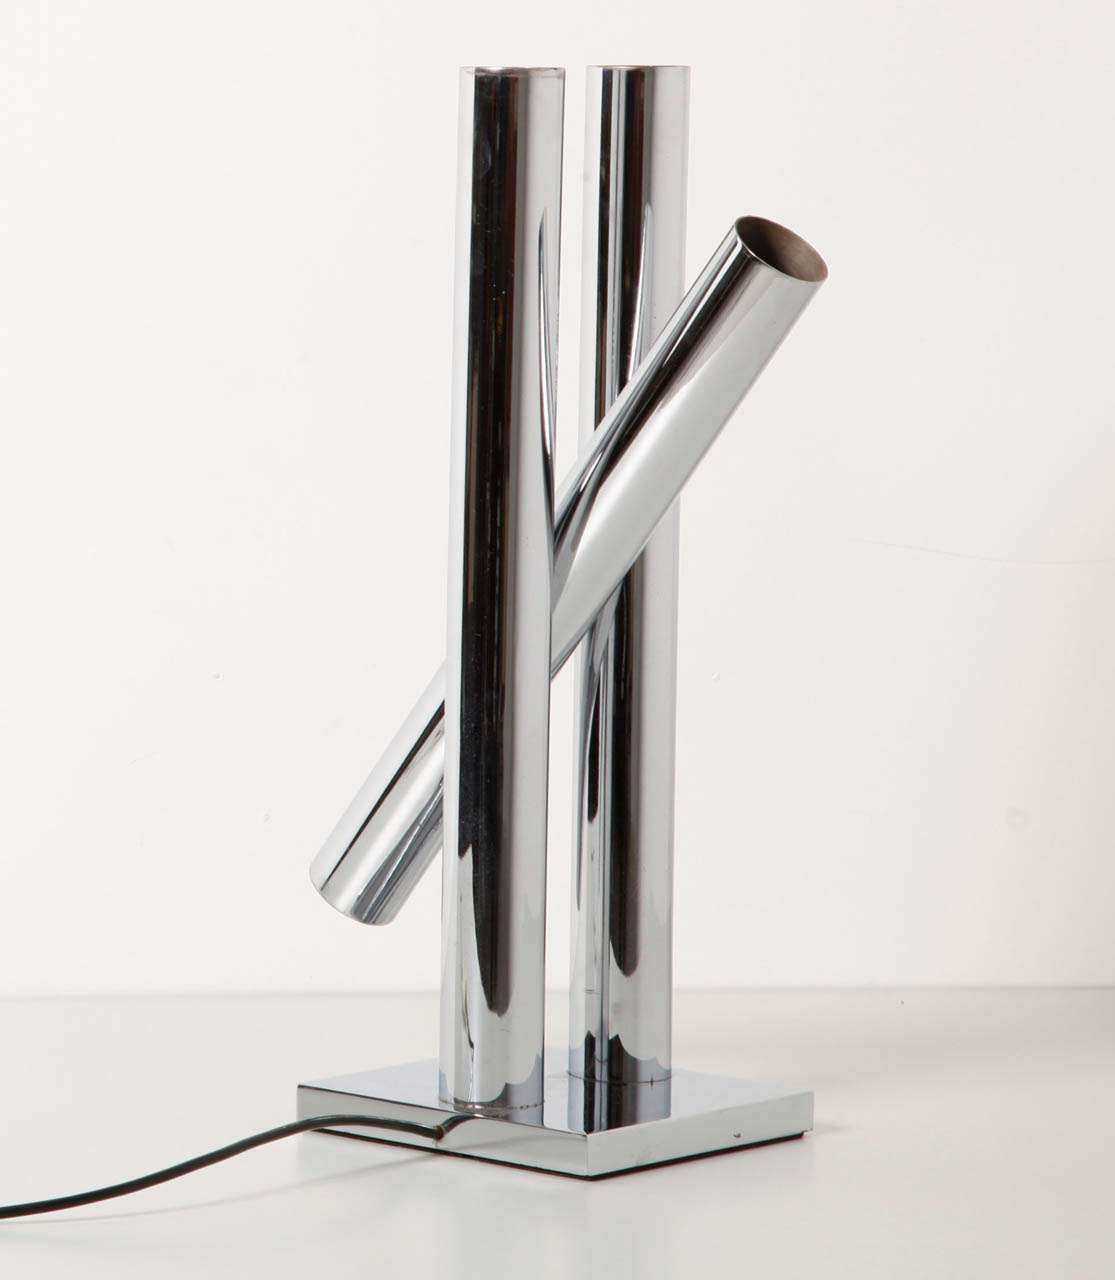 A chromed table lamp with 3 cylinders including 1 adjustable cylinder with 2 bulbs,total 4 bulbs.